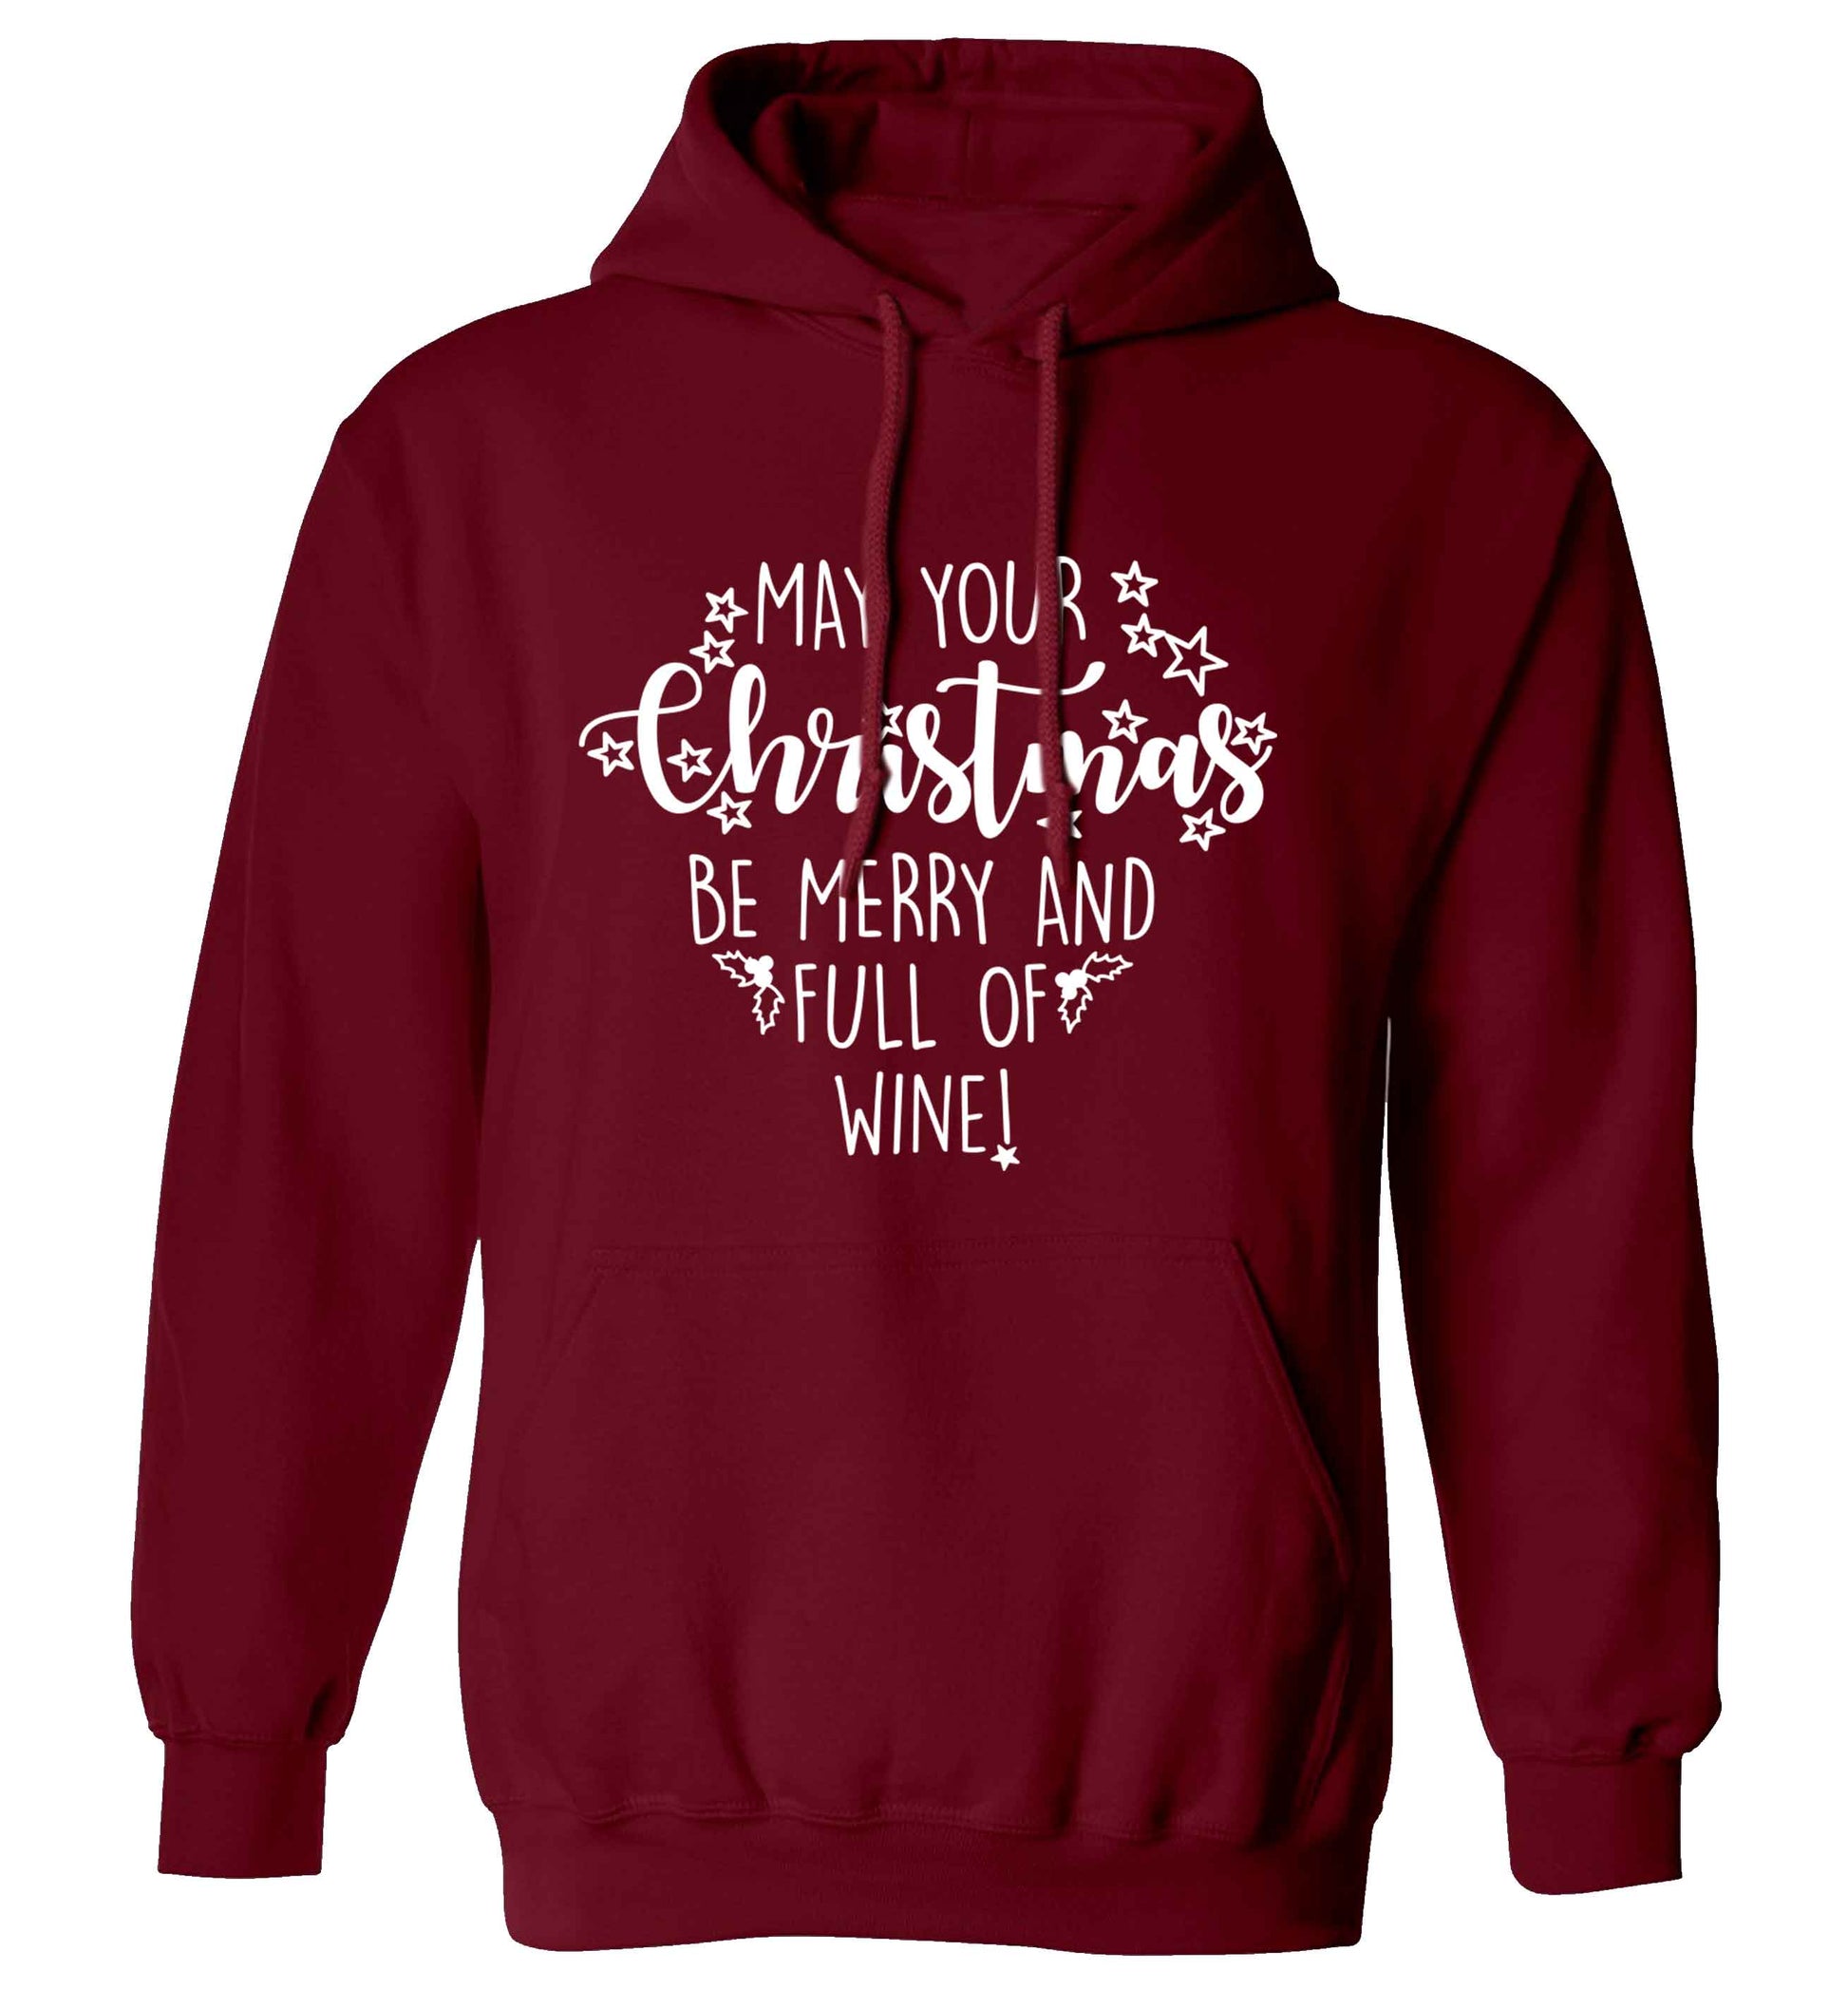 May your Christmas be merry and full of wine adults unisex maroon hoodie 2XL